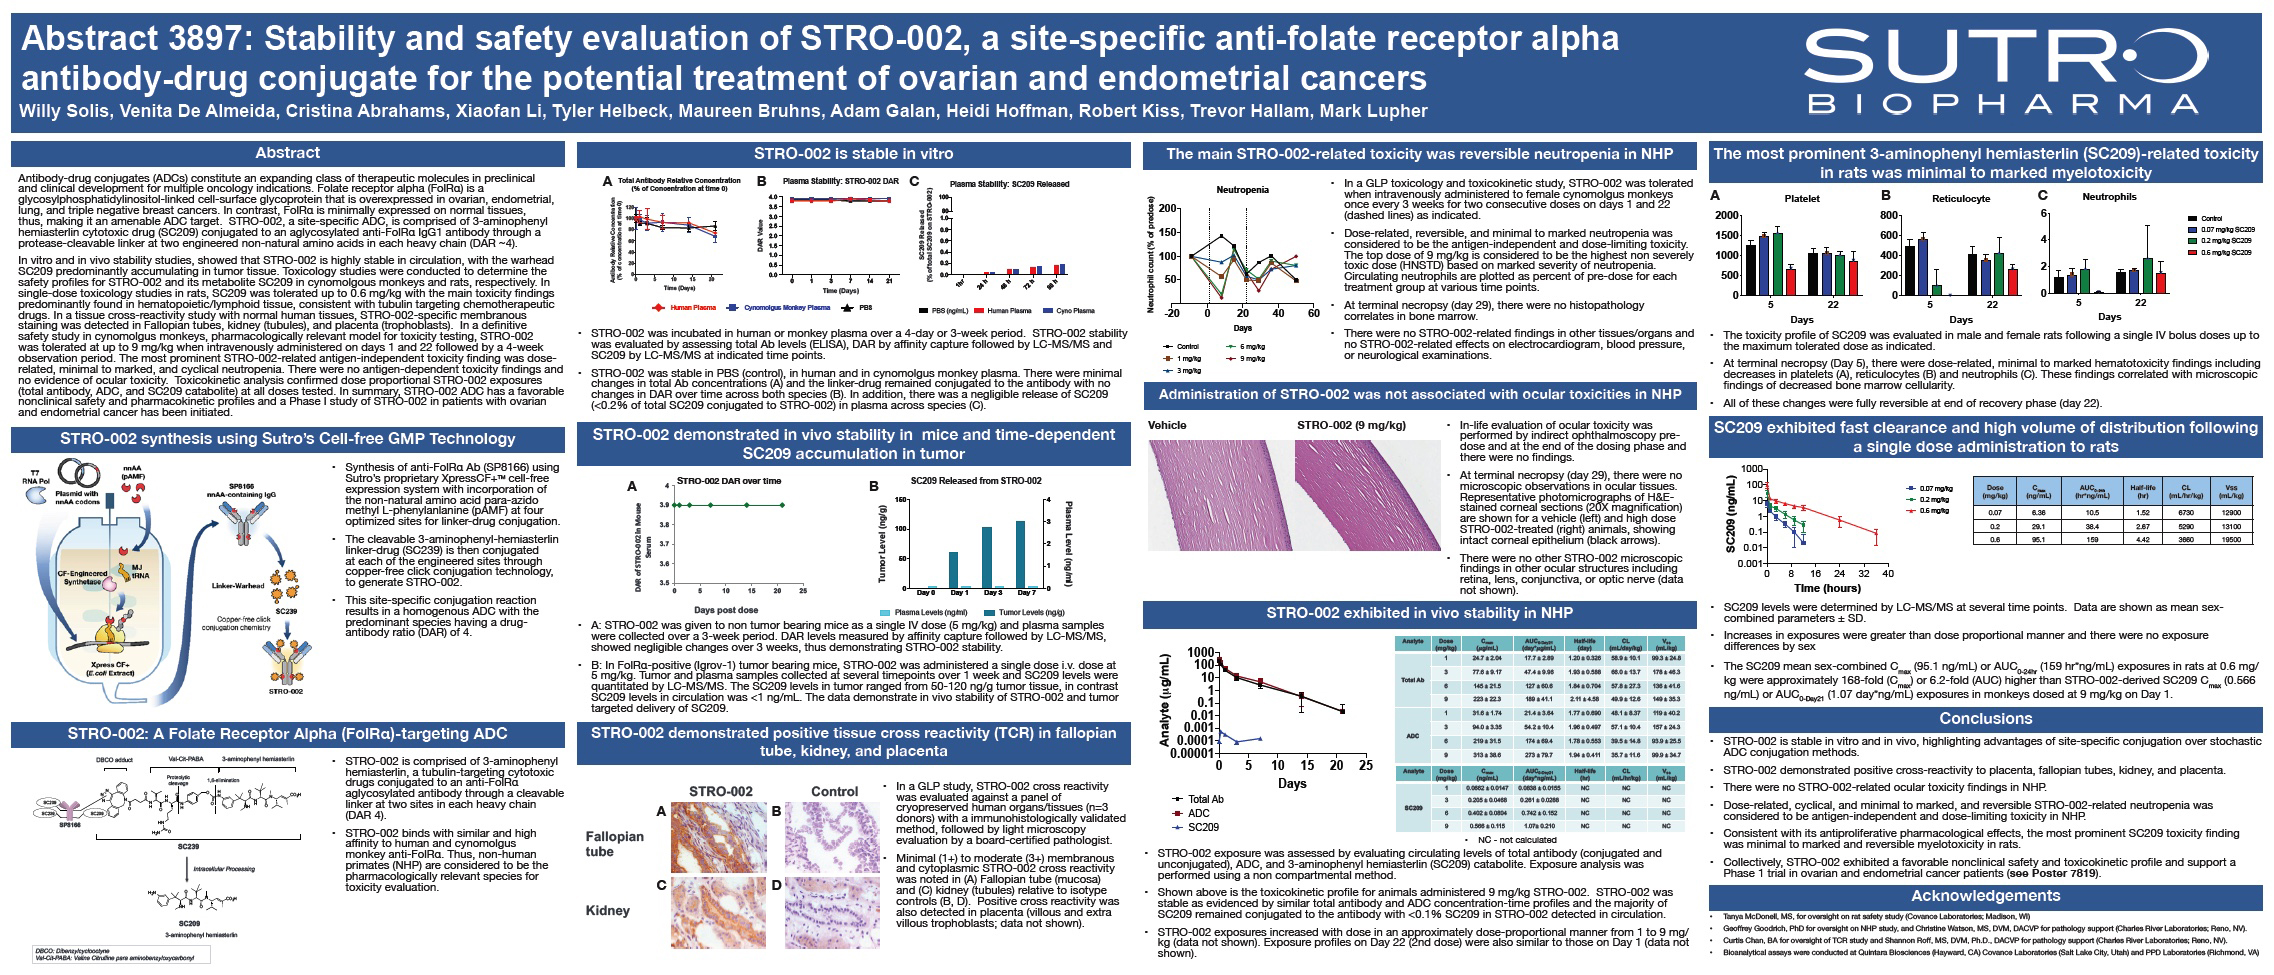 American Association for Cancer Research (AACR) 2019 STRO002